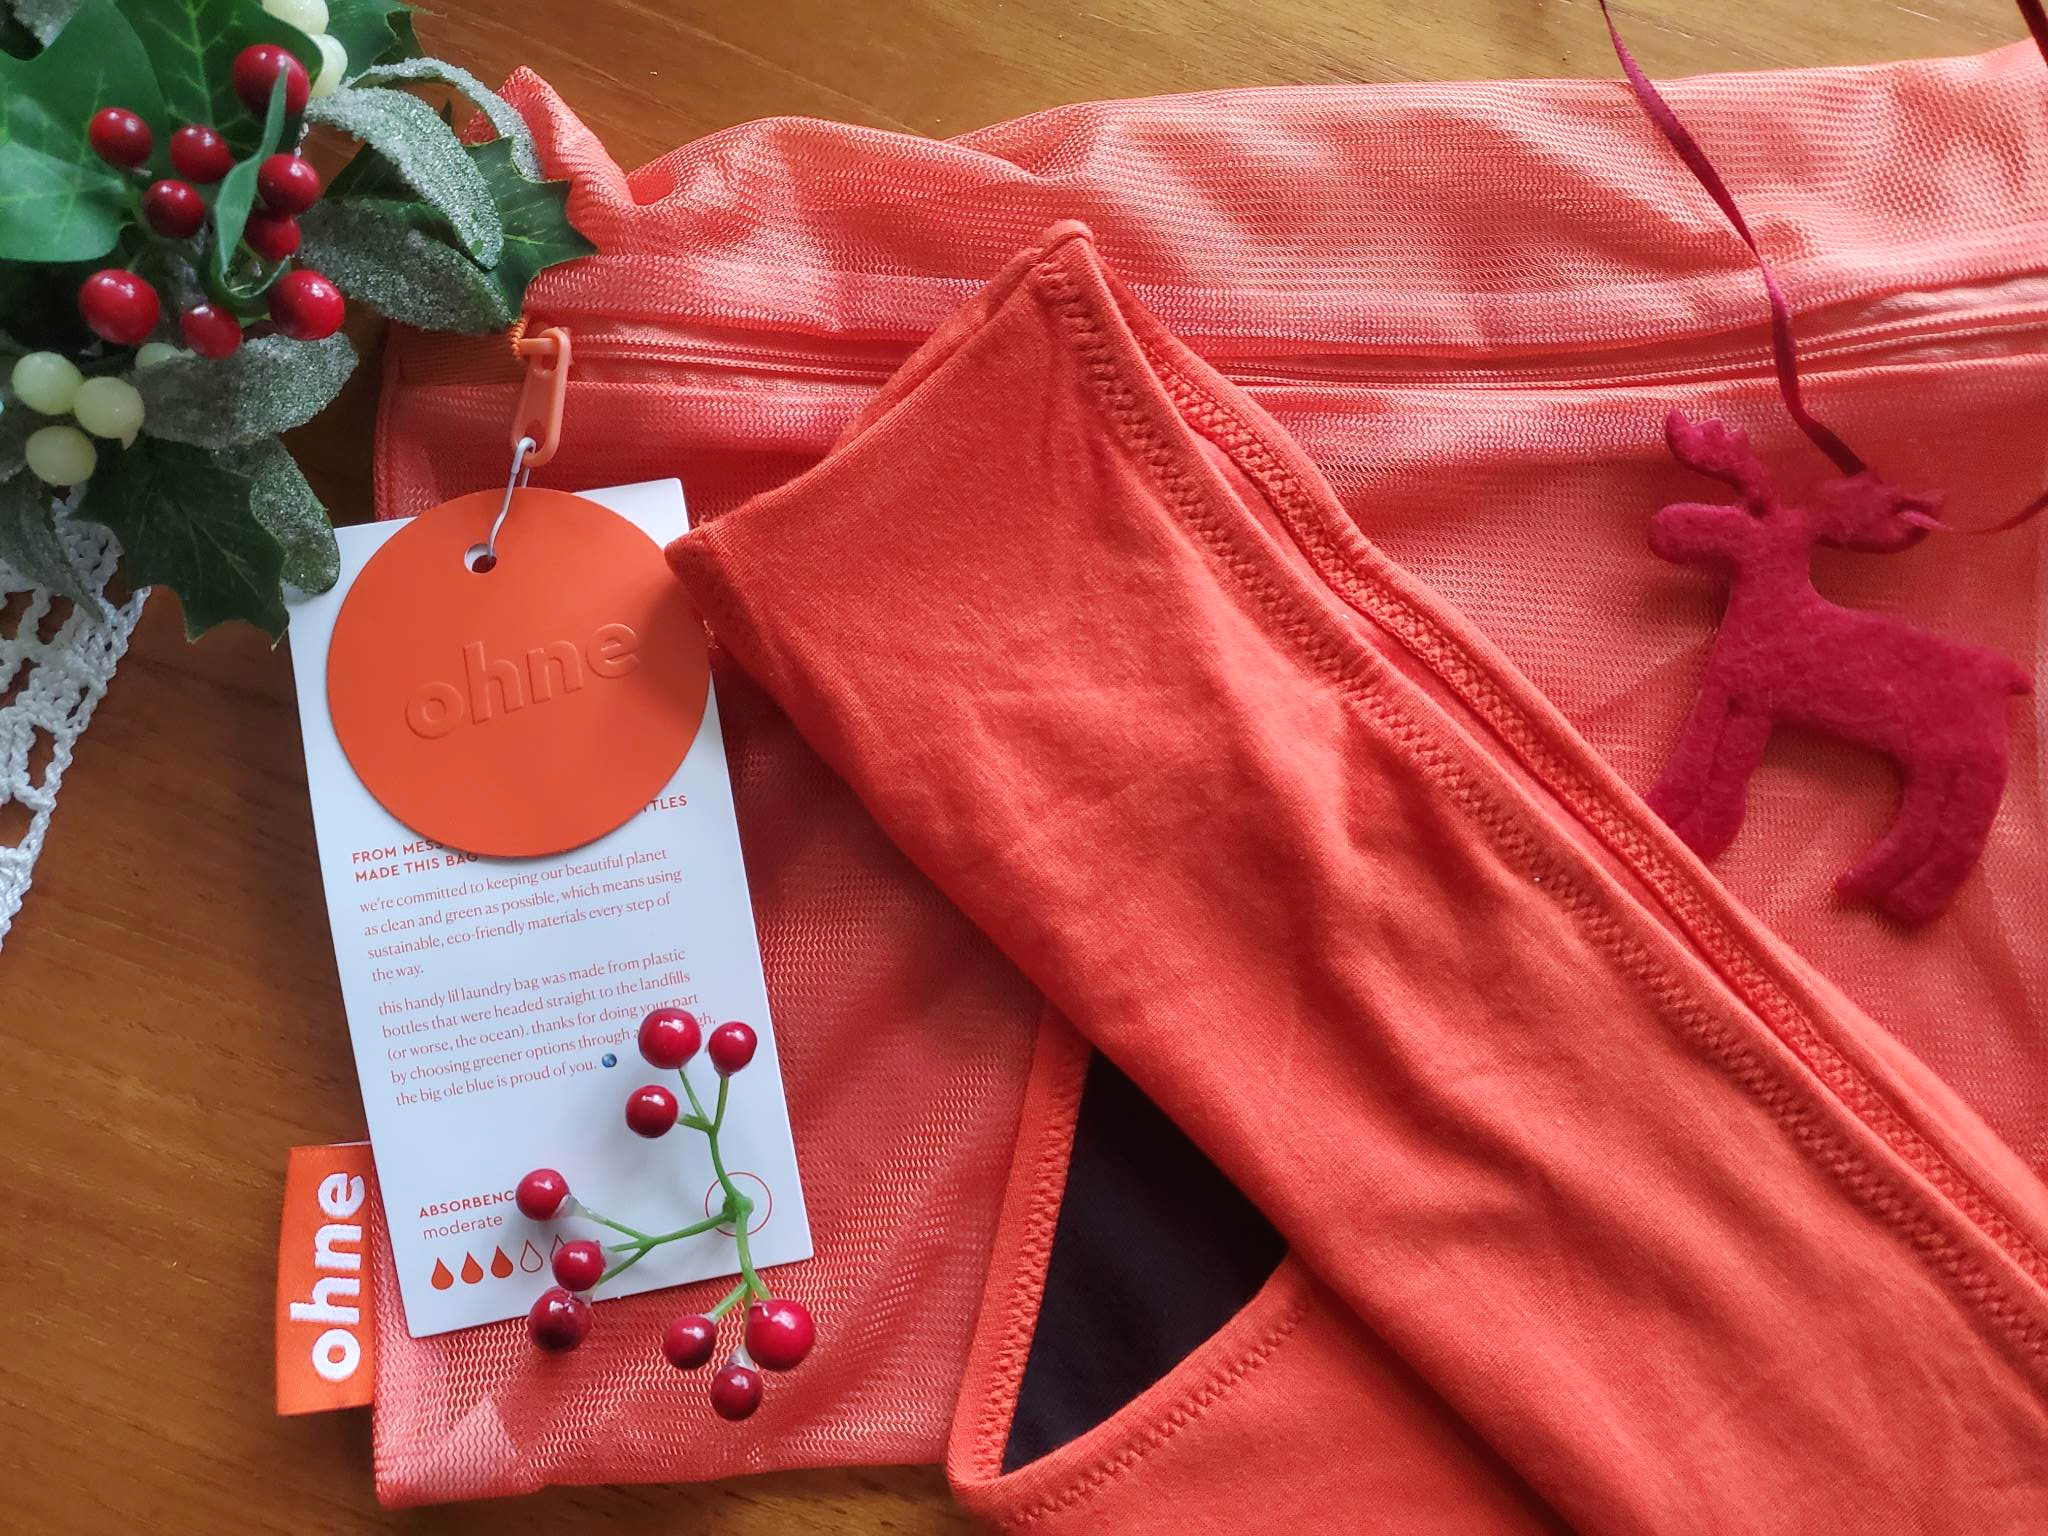 Ohne high waisted period pants in orange